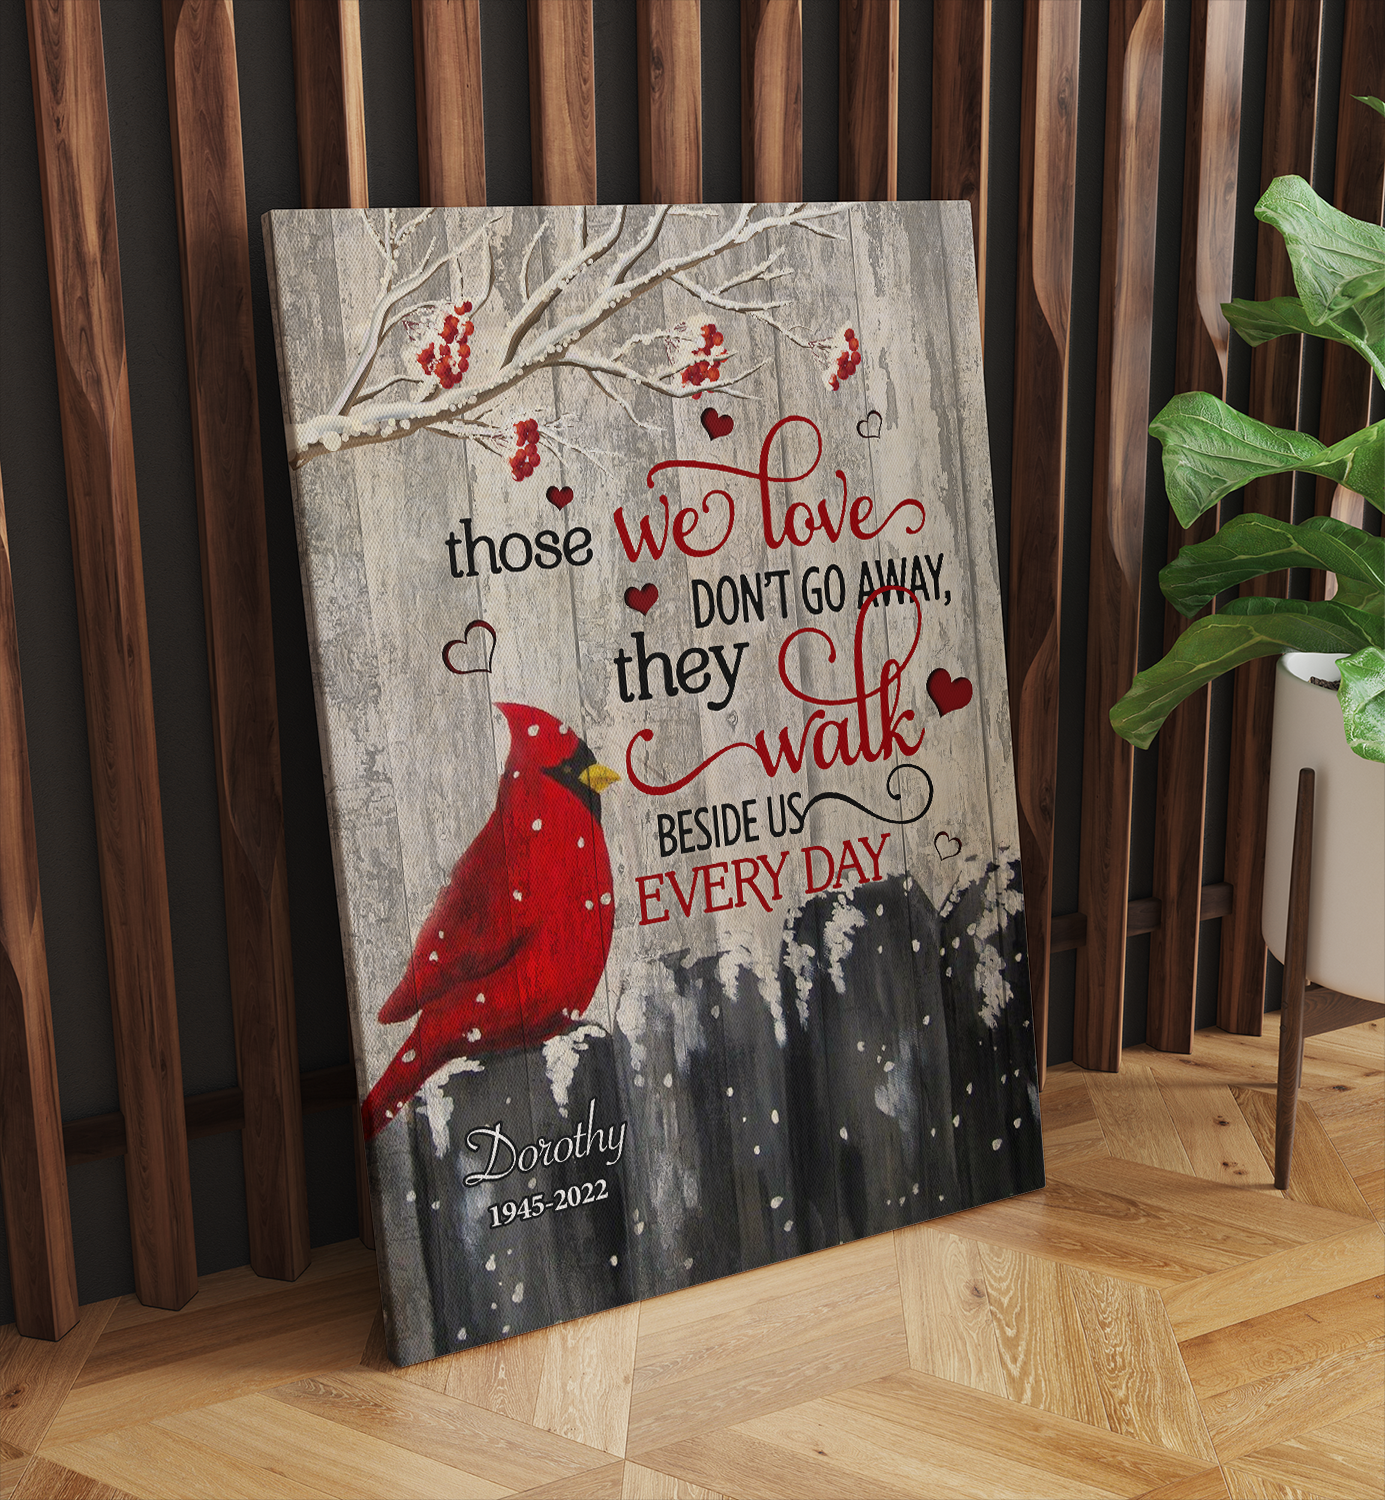 Cardinal Poster Canvas Blue Jay Bird Those We Love Don't Go Away They Fly  Beside Us Every Day Horizontal Poster Canvas Home Decor No Frame or 0.7